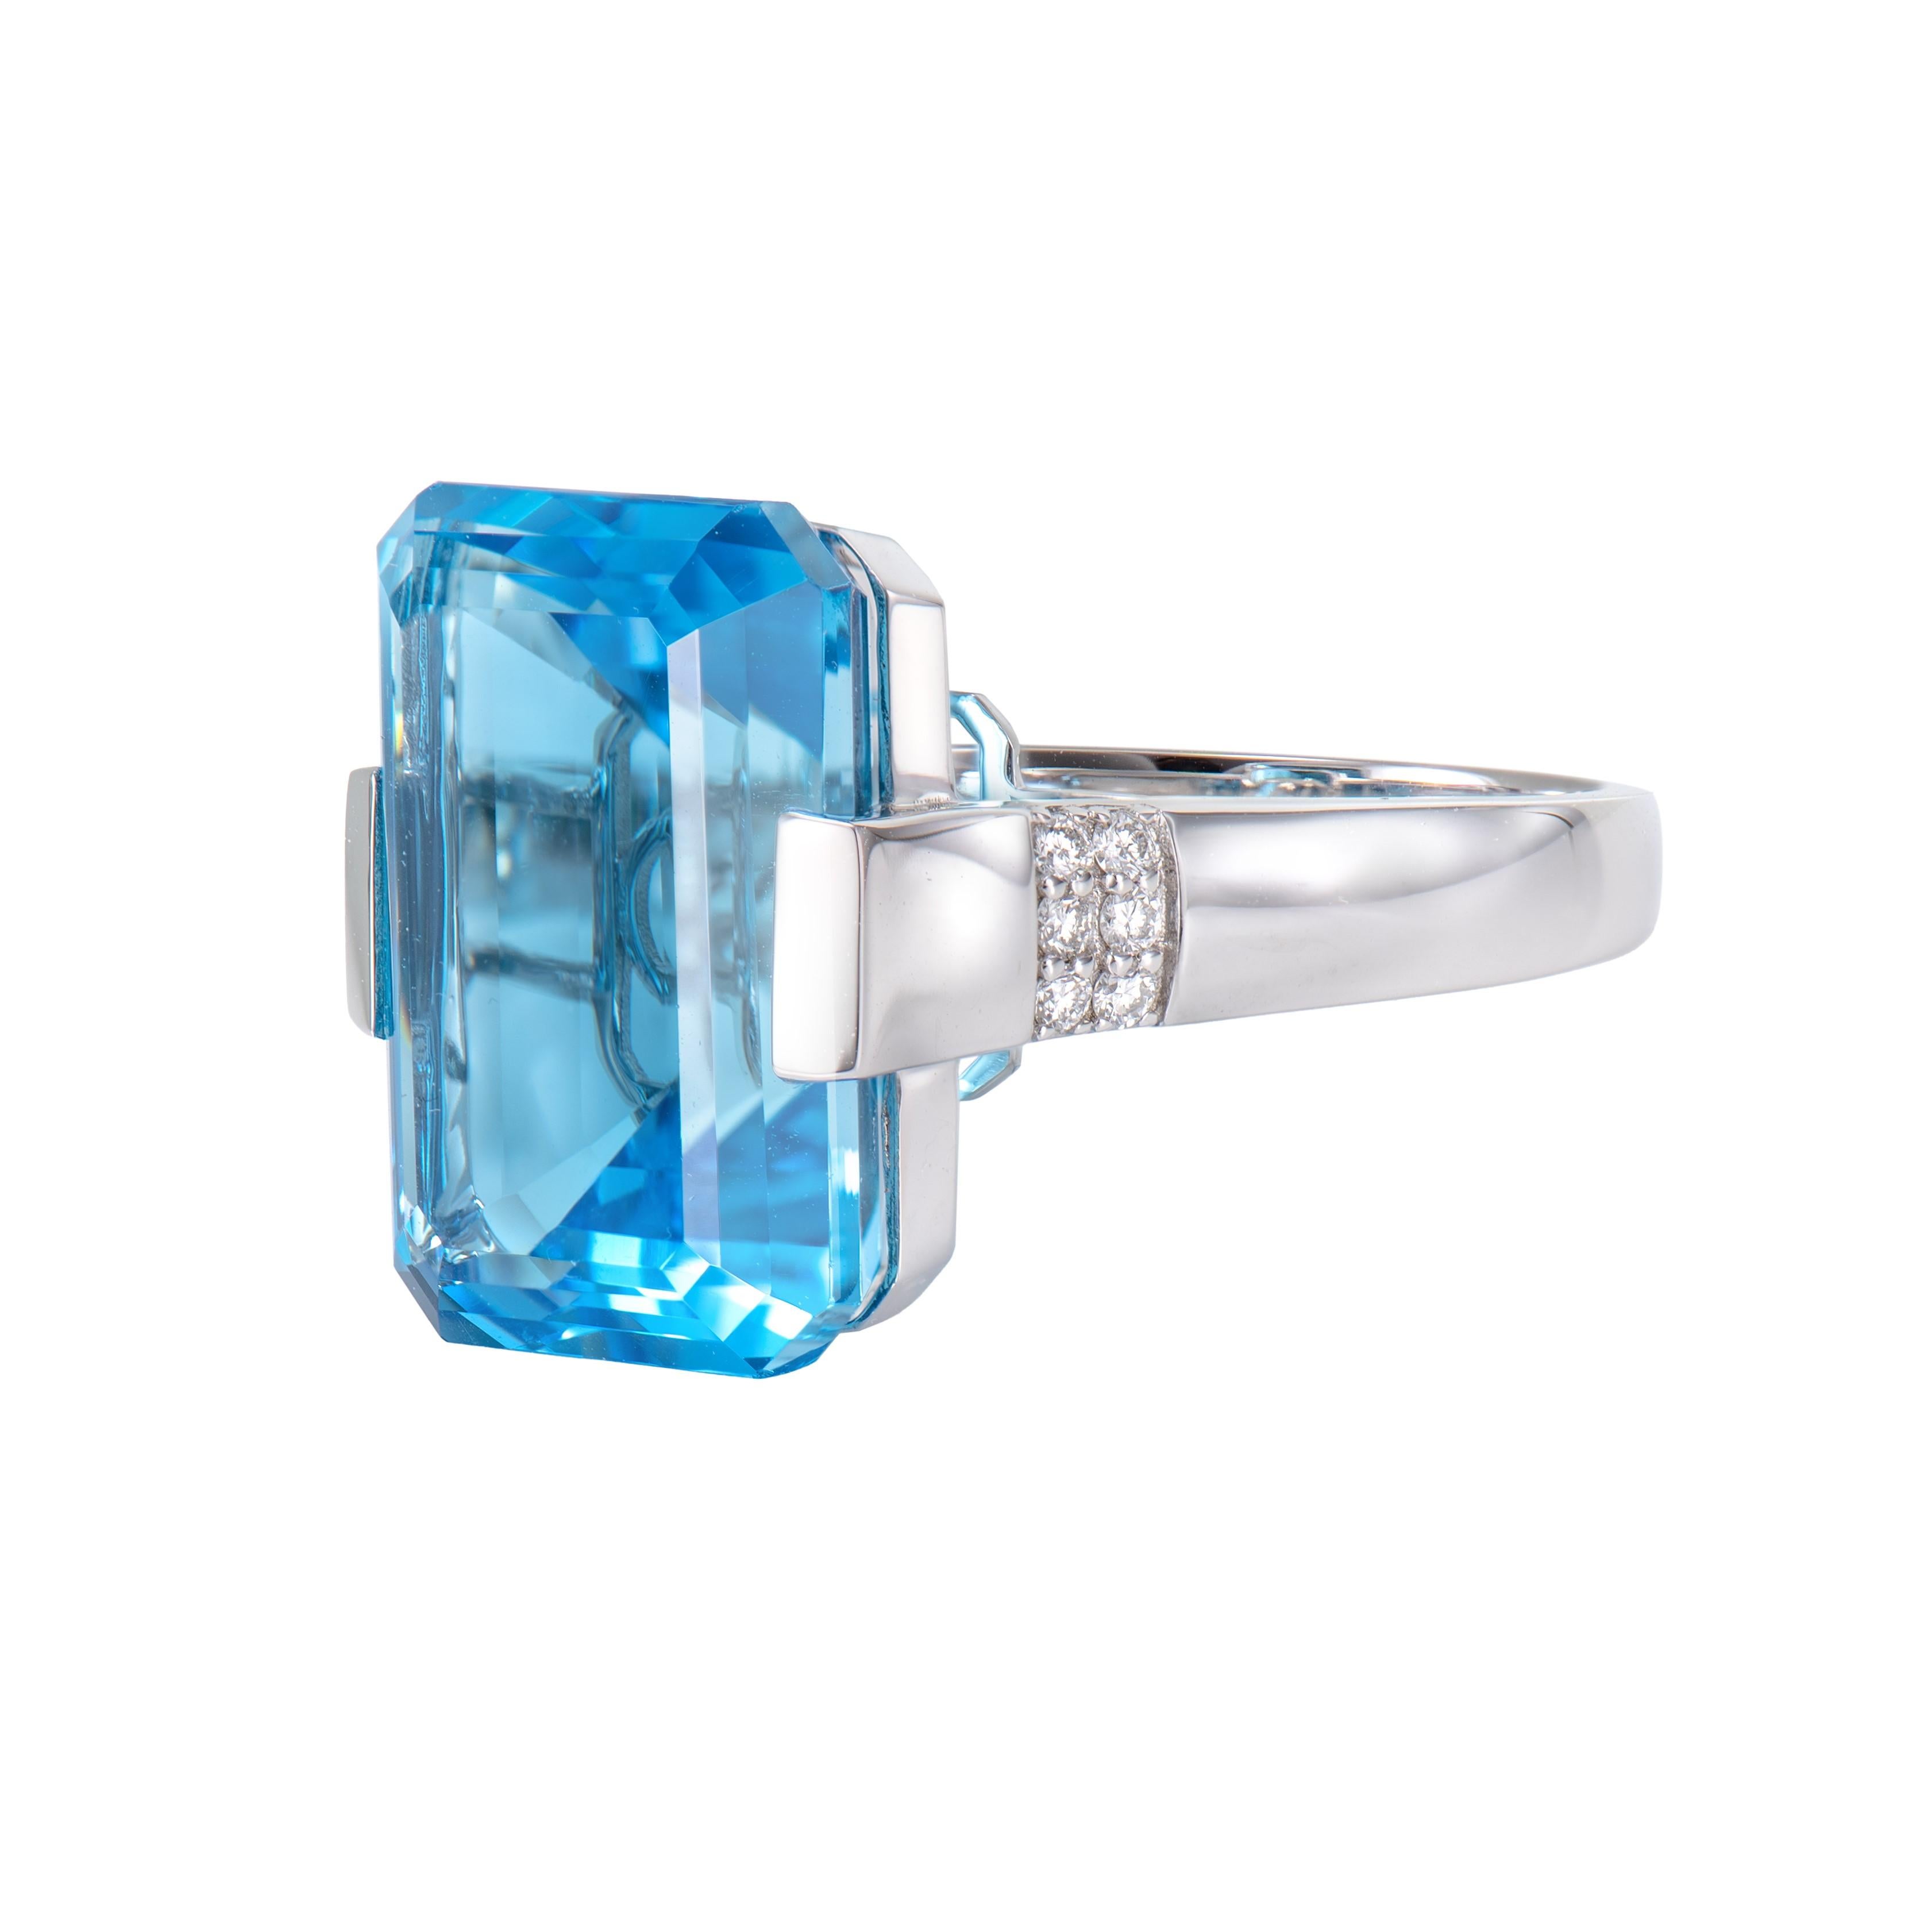 Octagon Cut 20.86 Carat Swiss Blue Topaz Fancy Ring in 18K White Gold with White Diamond. For Sale